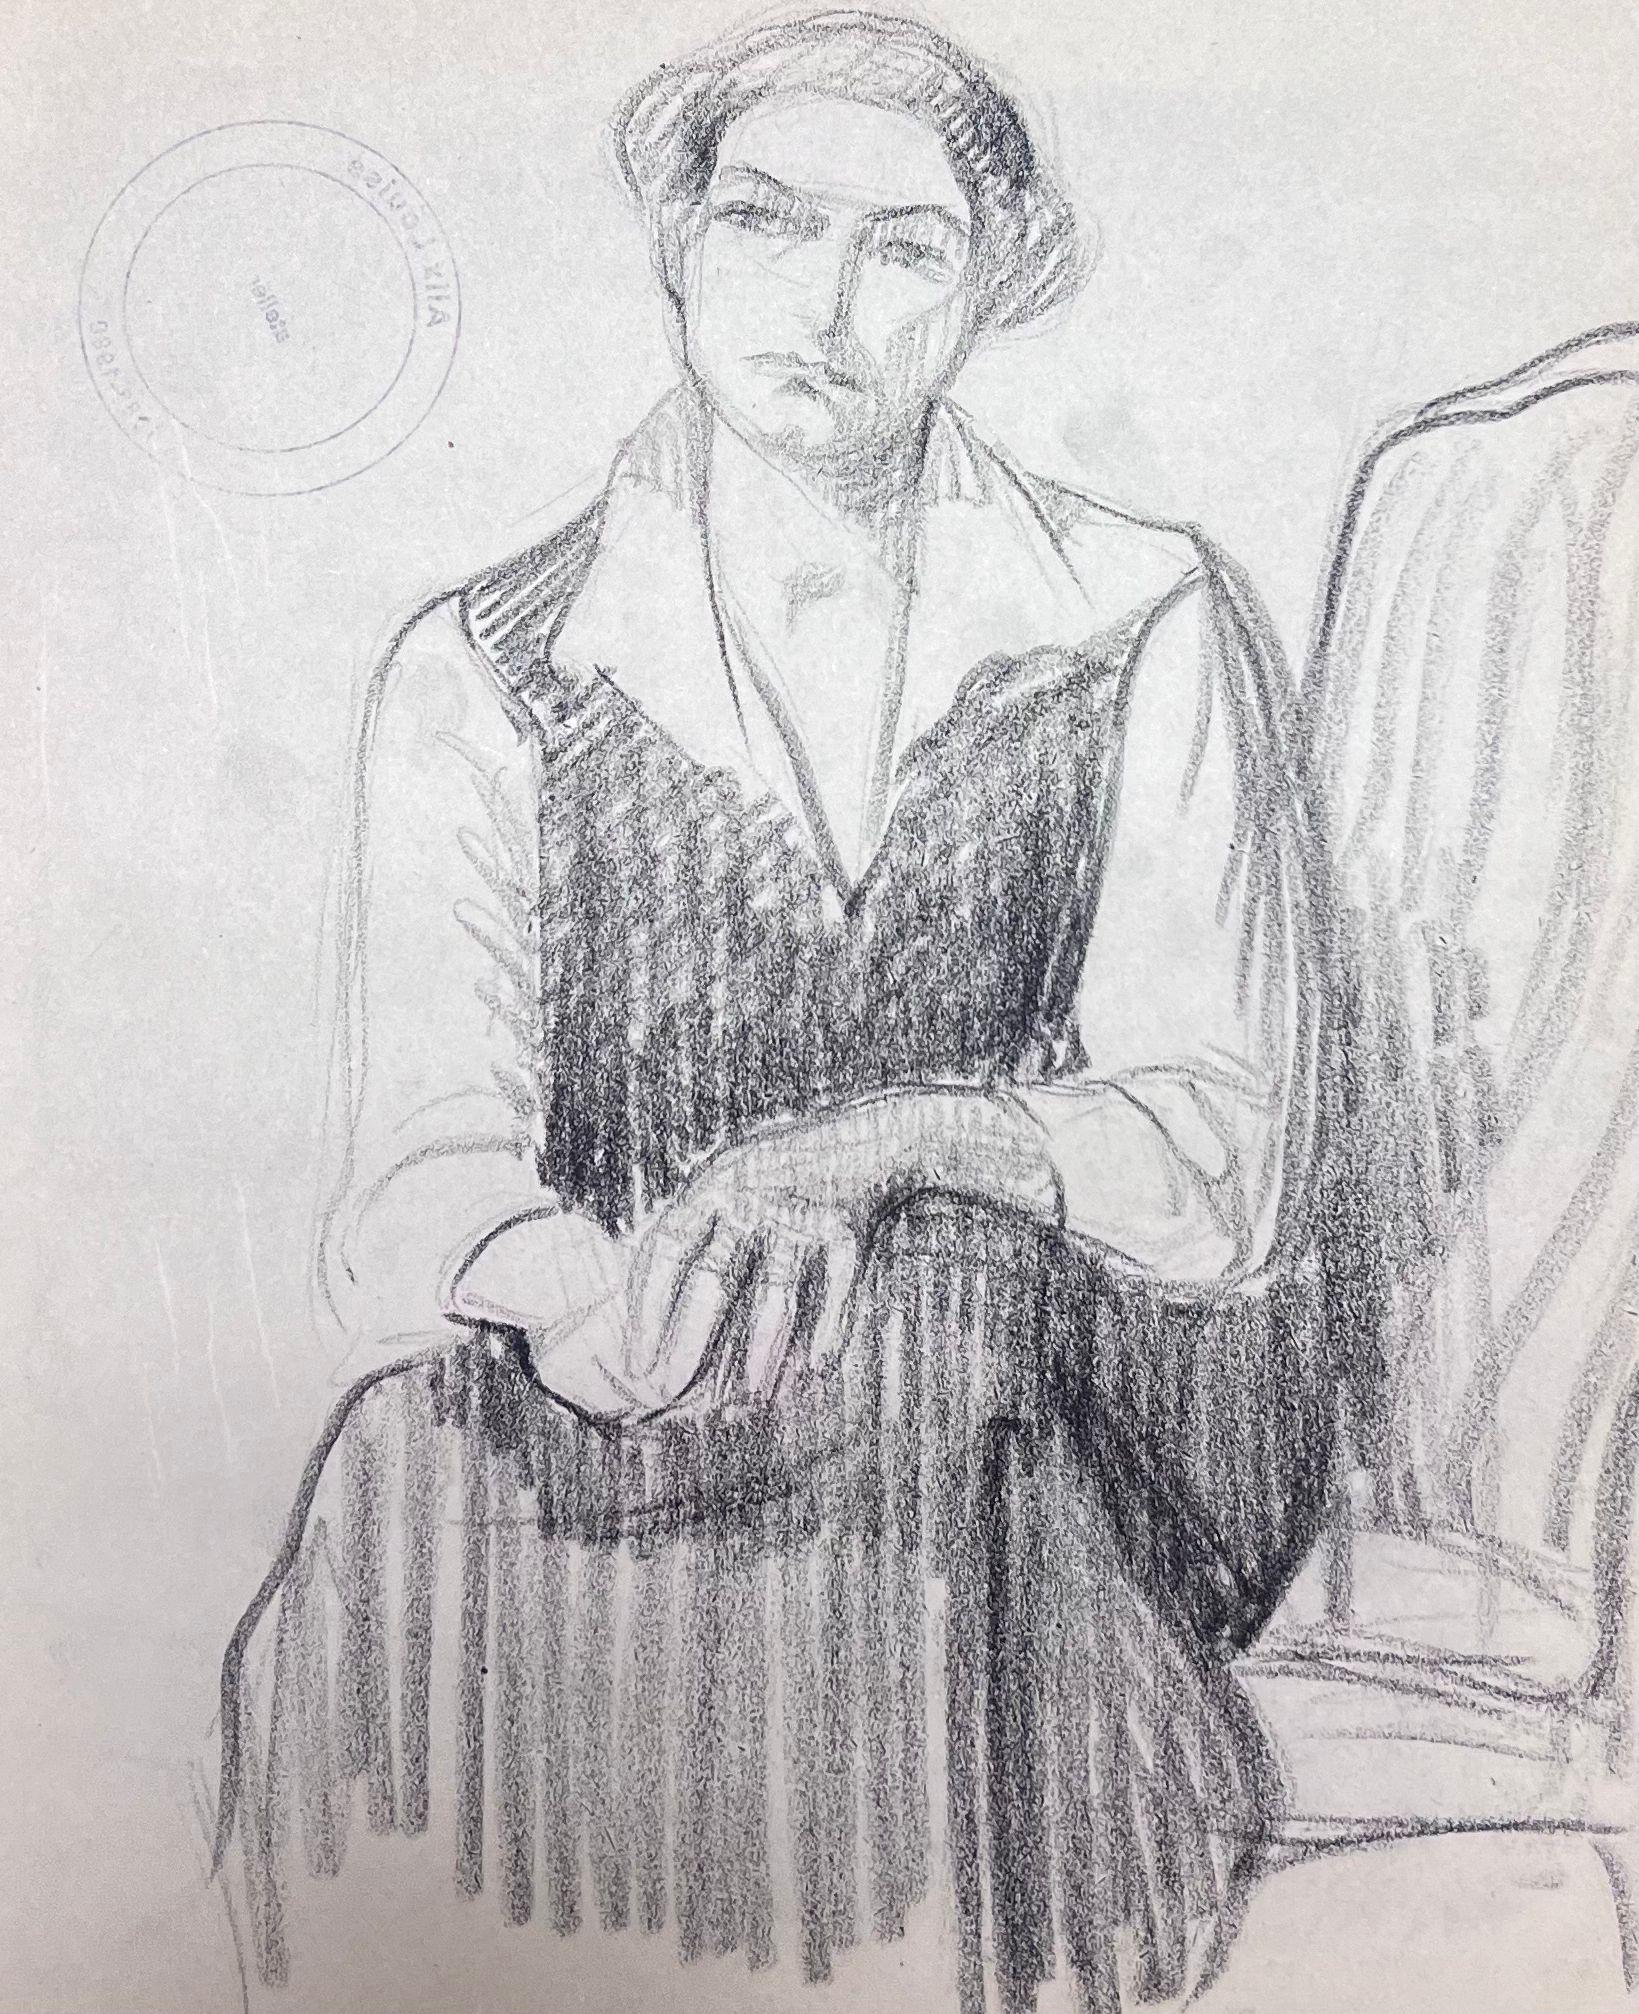 Posed Lady
by Louise Alix (French, 1888-1980) *see notes below
provenance stamp to the back 
pencil drawing on artist paper, unframed
measures: 10 high by 8.25 inches wide
condition: overall very good and sound, a few scuffs and marks to the surface